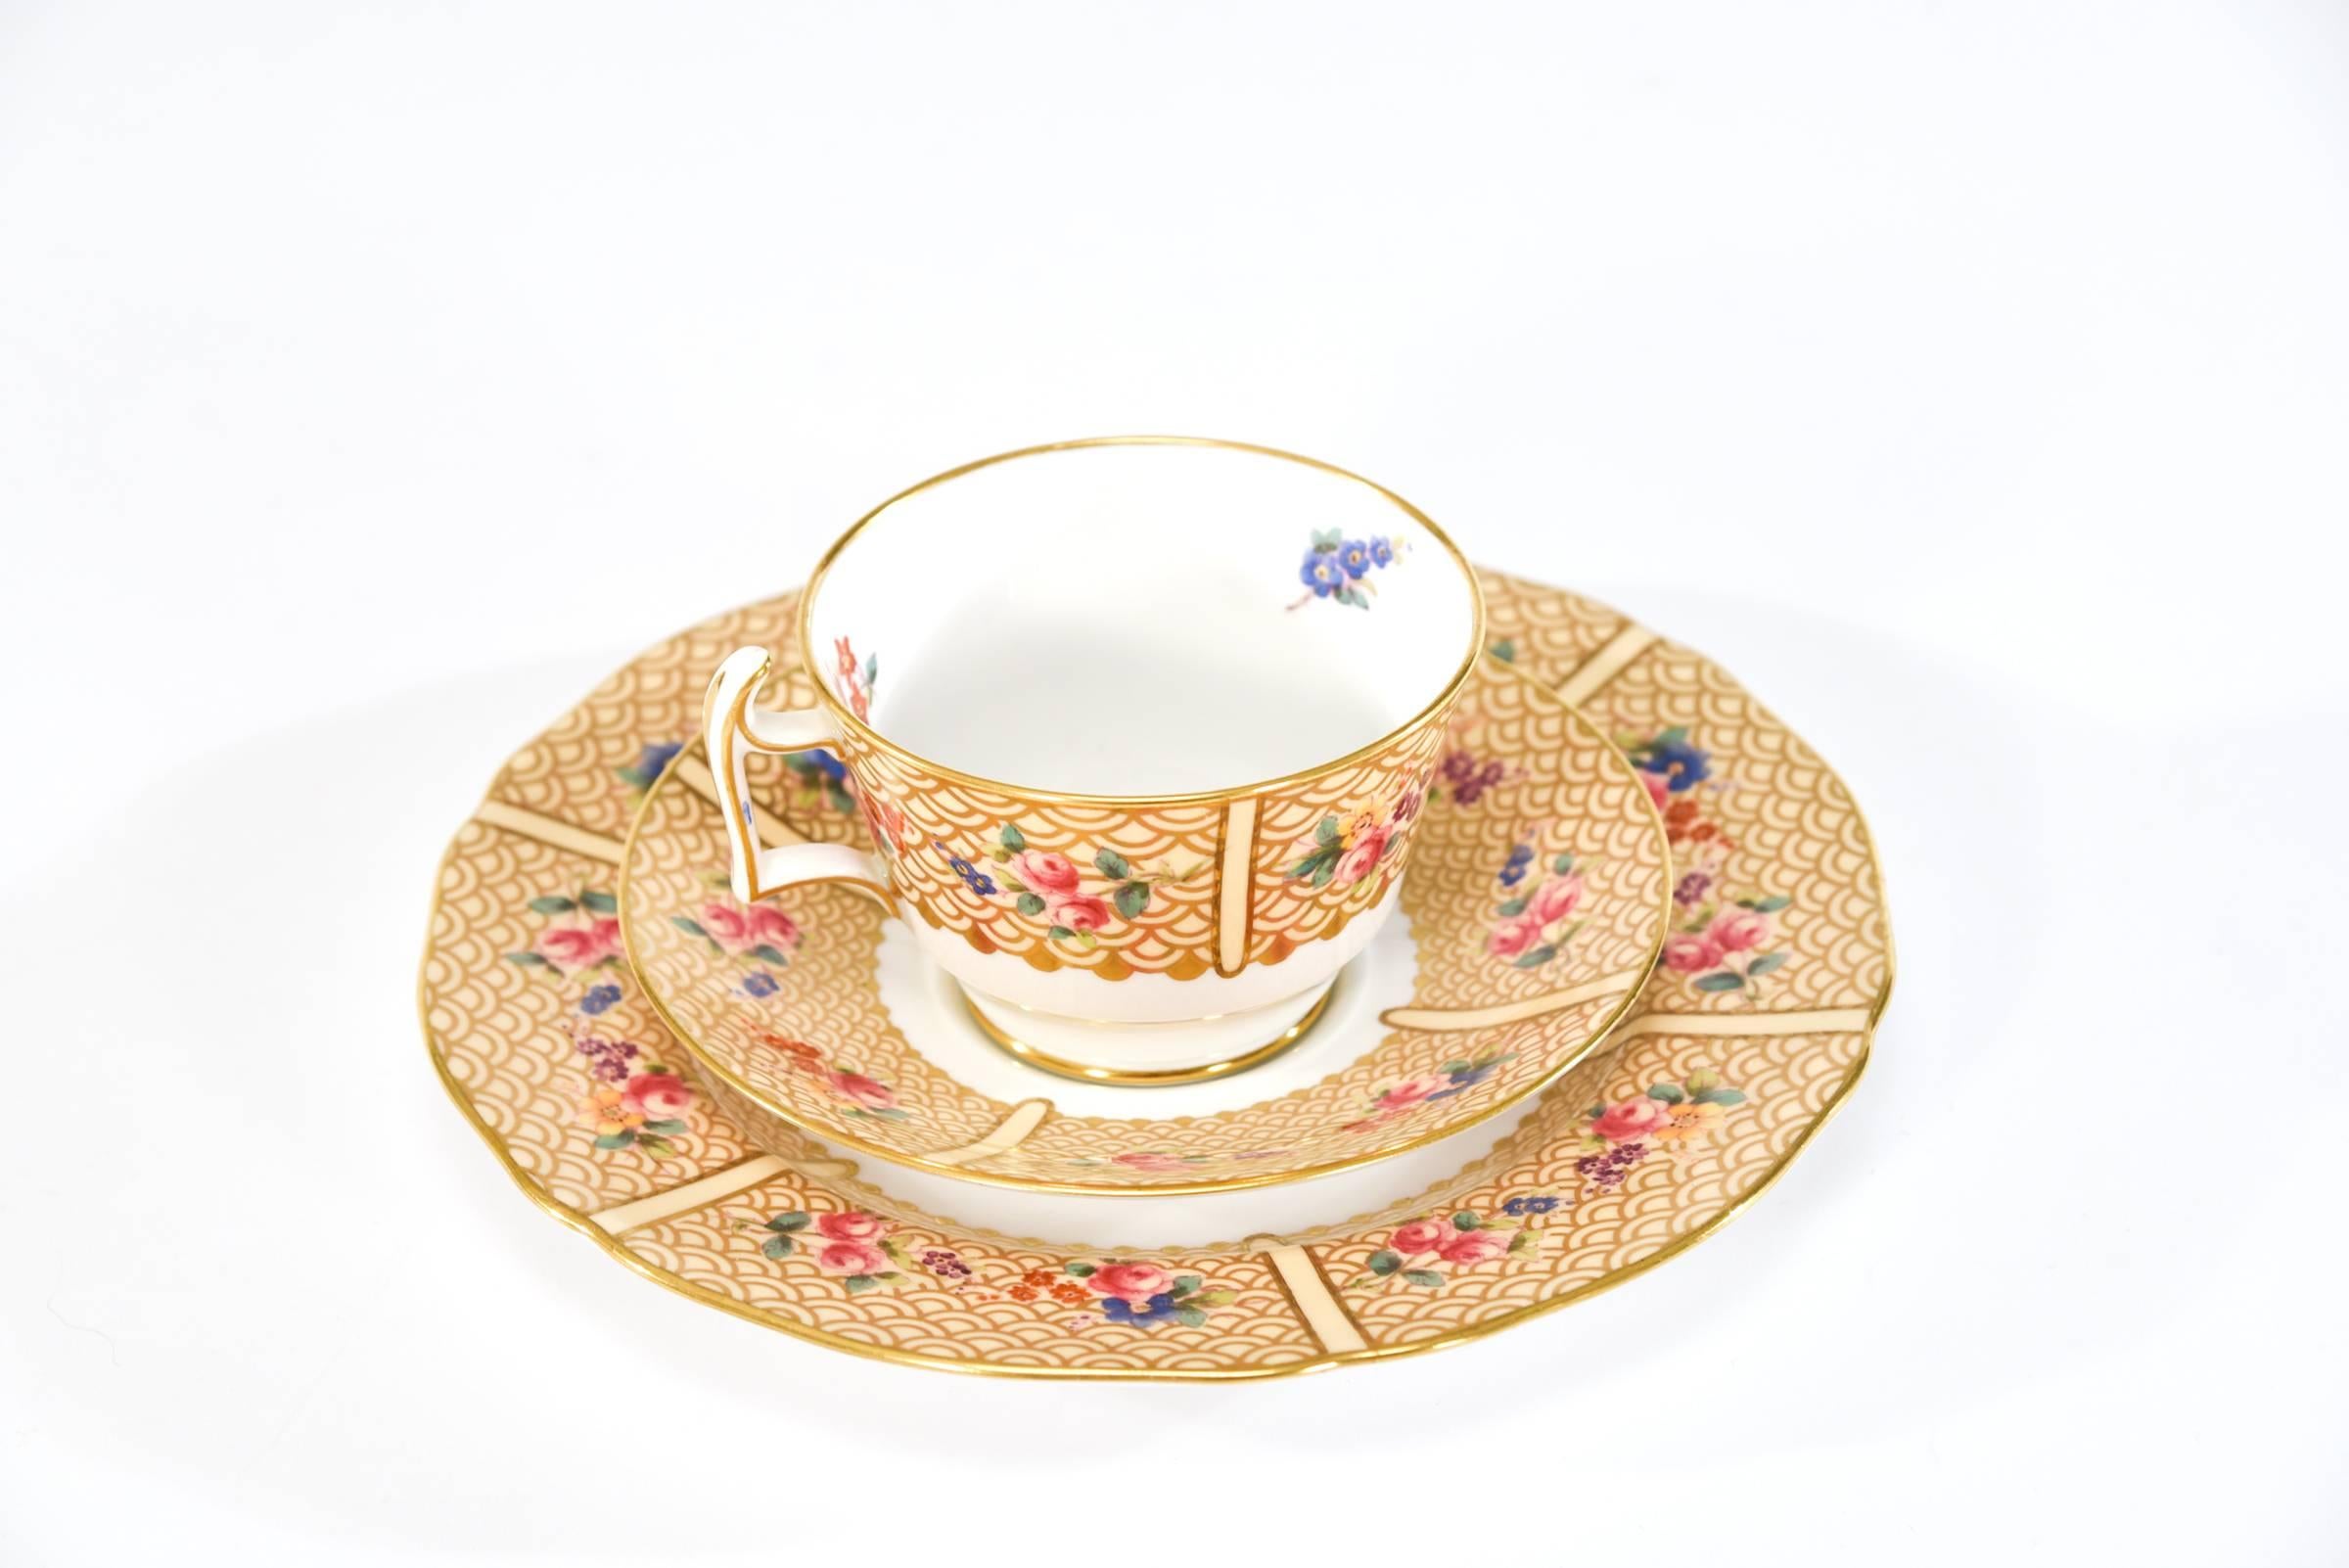 Copeland Spode for Tiffany Dessert & Tea Set for 12 Floral Japonesque Service  In Excellent Condition For Sale In Great Barrington, MA